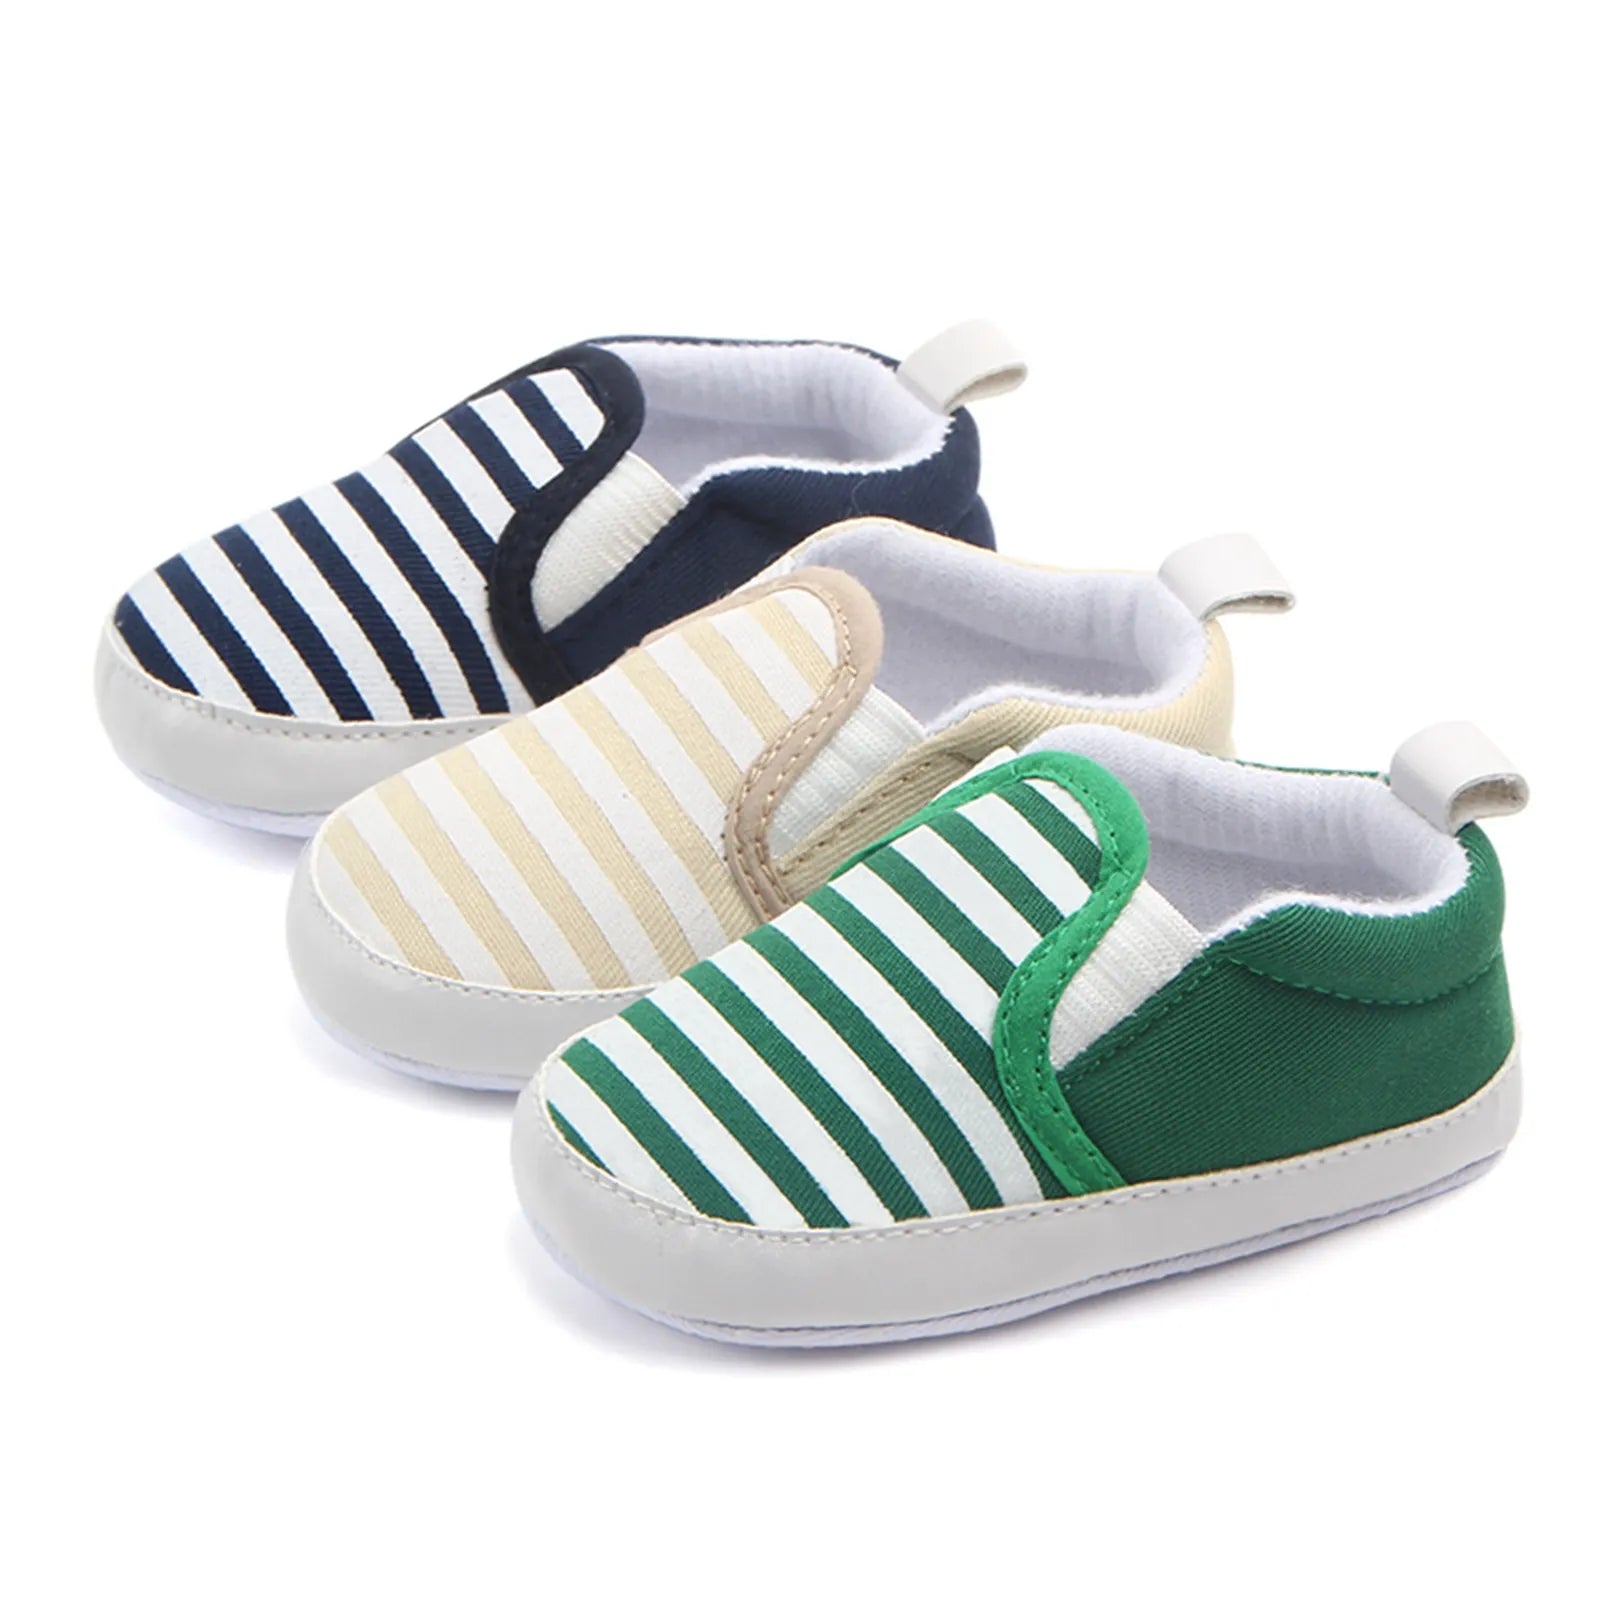 Infant Newborn Baby Flat Shoes, Stripe Print Non-Slip Slippers Soft Sole Adorable Baby Booties Babies First Walking Shoes 0-18M